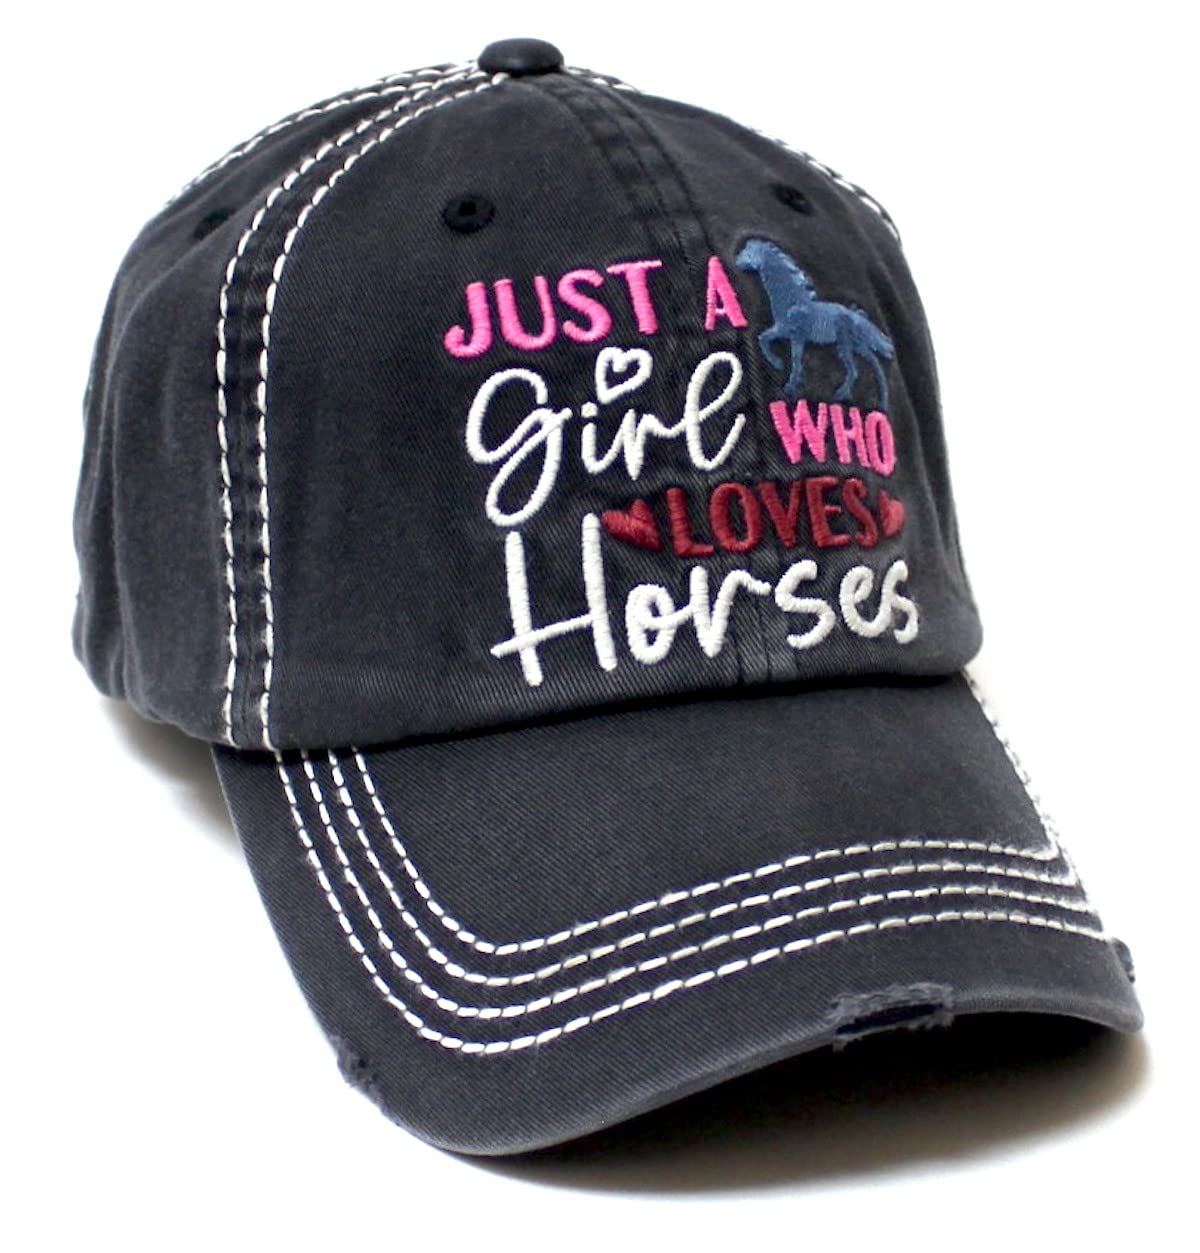 Camp Theme Baseball Hat Just a Girl who Loves Horses Monogram Embroidery Cap, Black